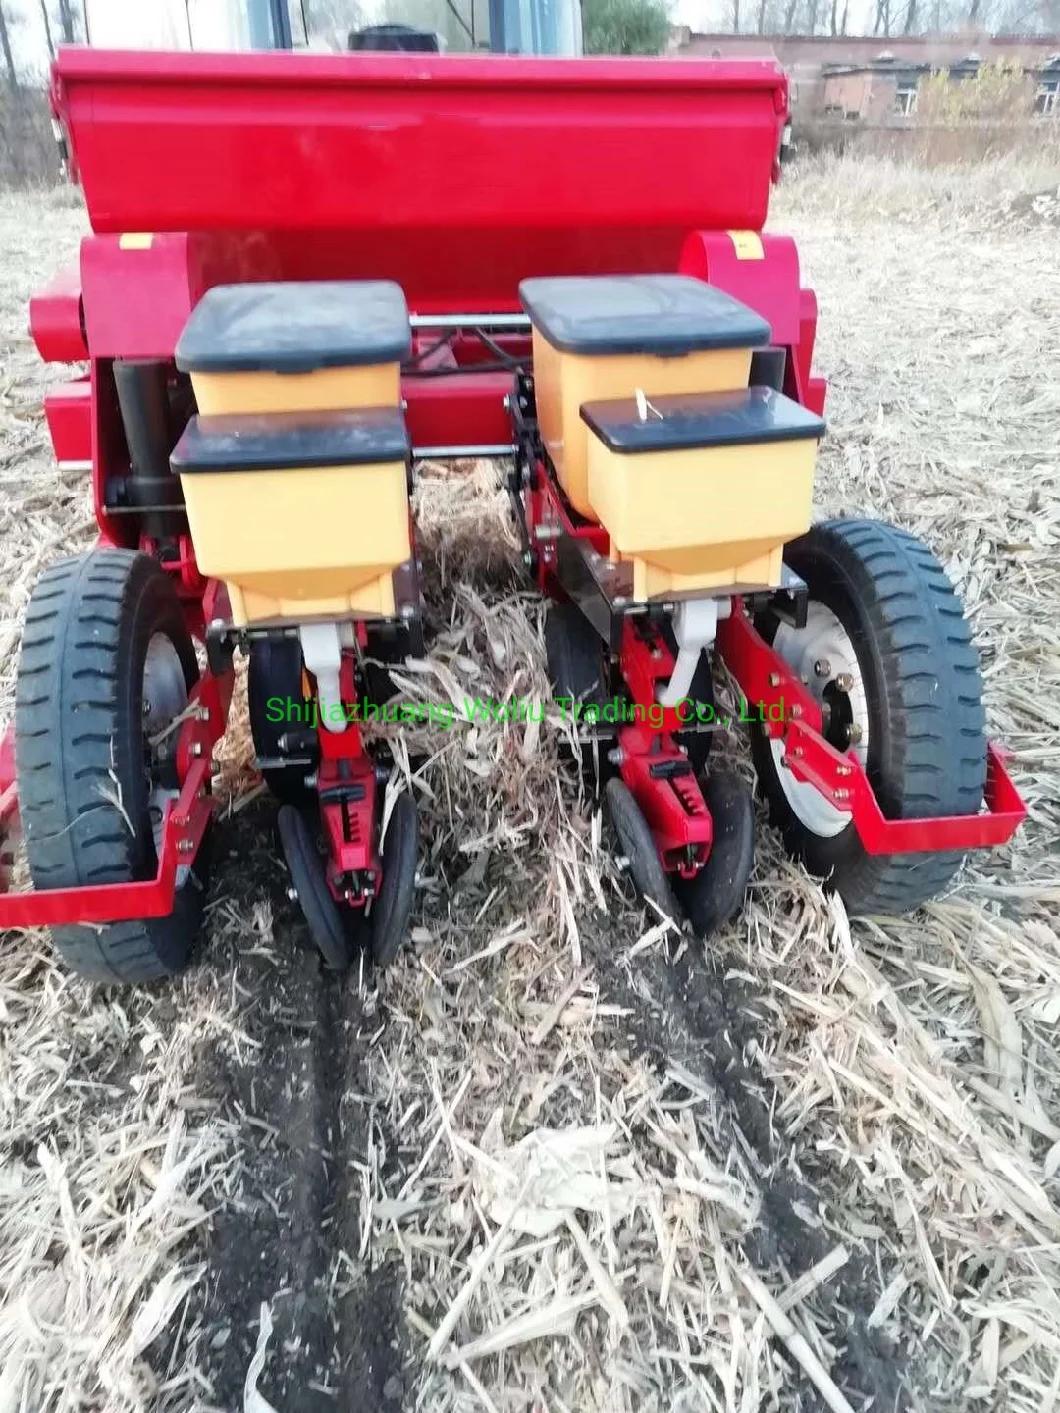 China Brand No-Tillage & Heavy Type Corn, Soybean, Beans, Sunflower, Peanut Precision Seeder with Double Disc Furrow Opener for Fertilizing and Seeding